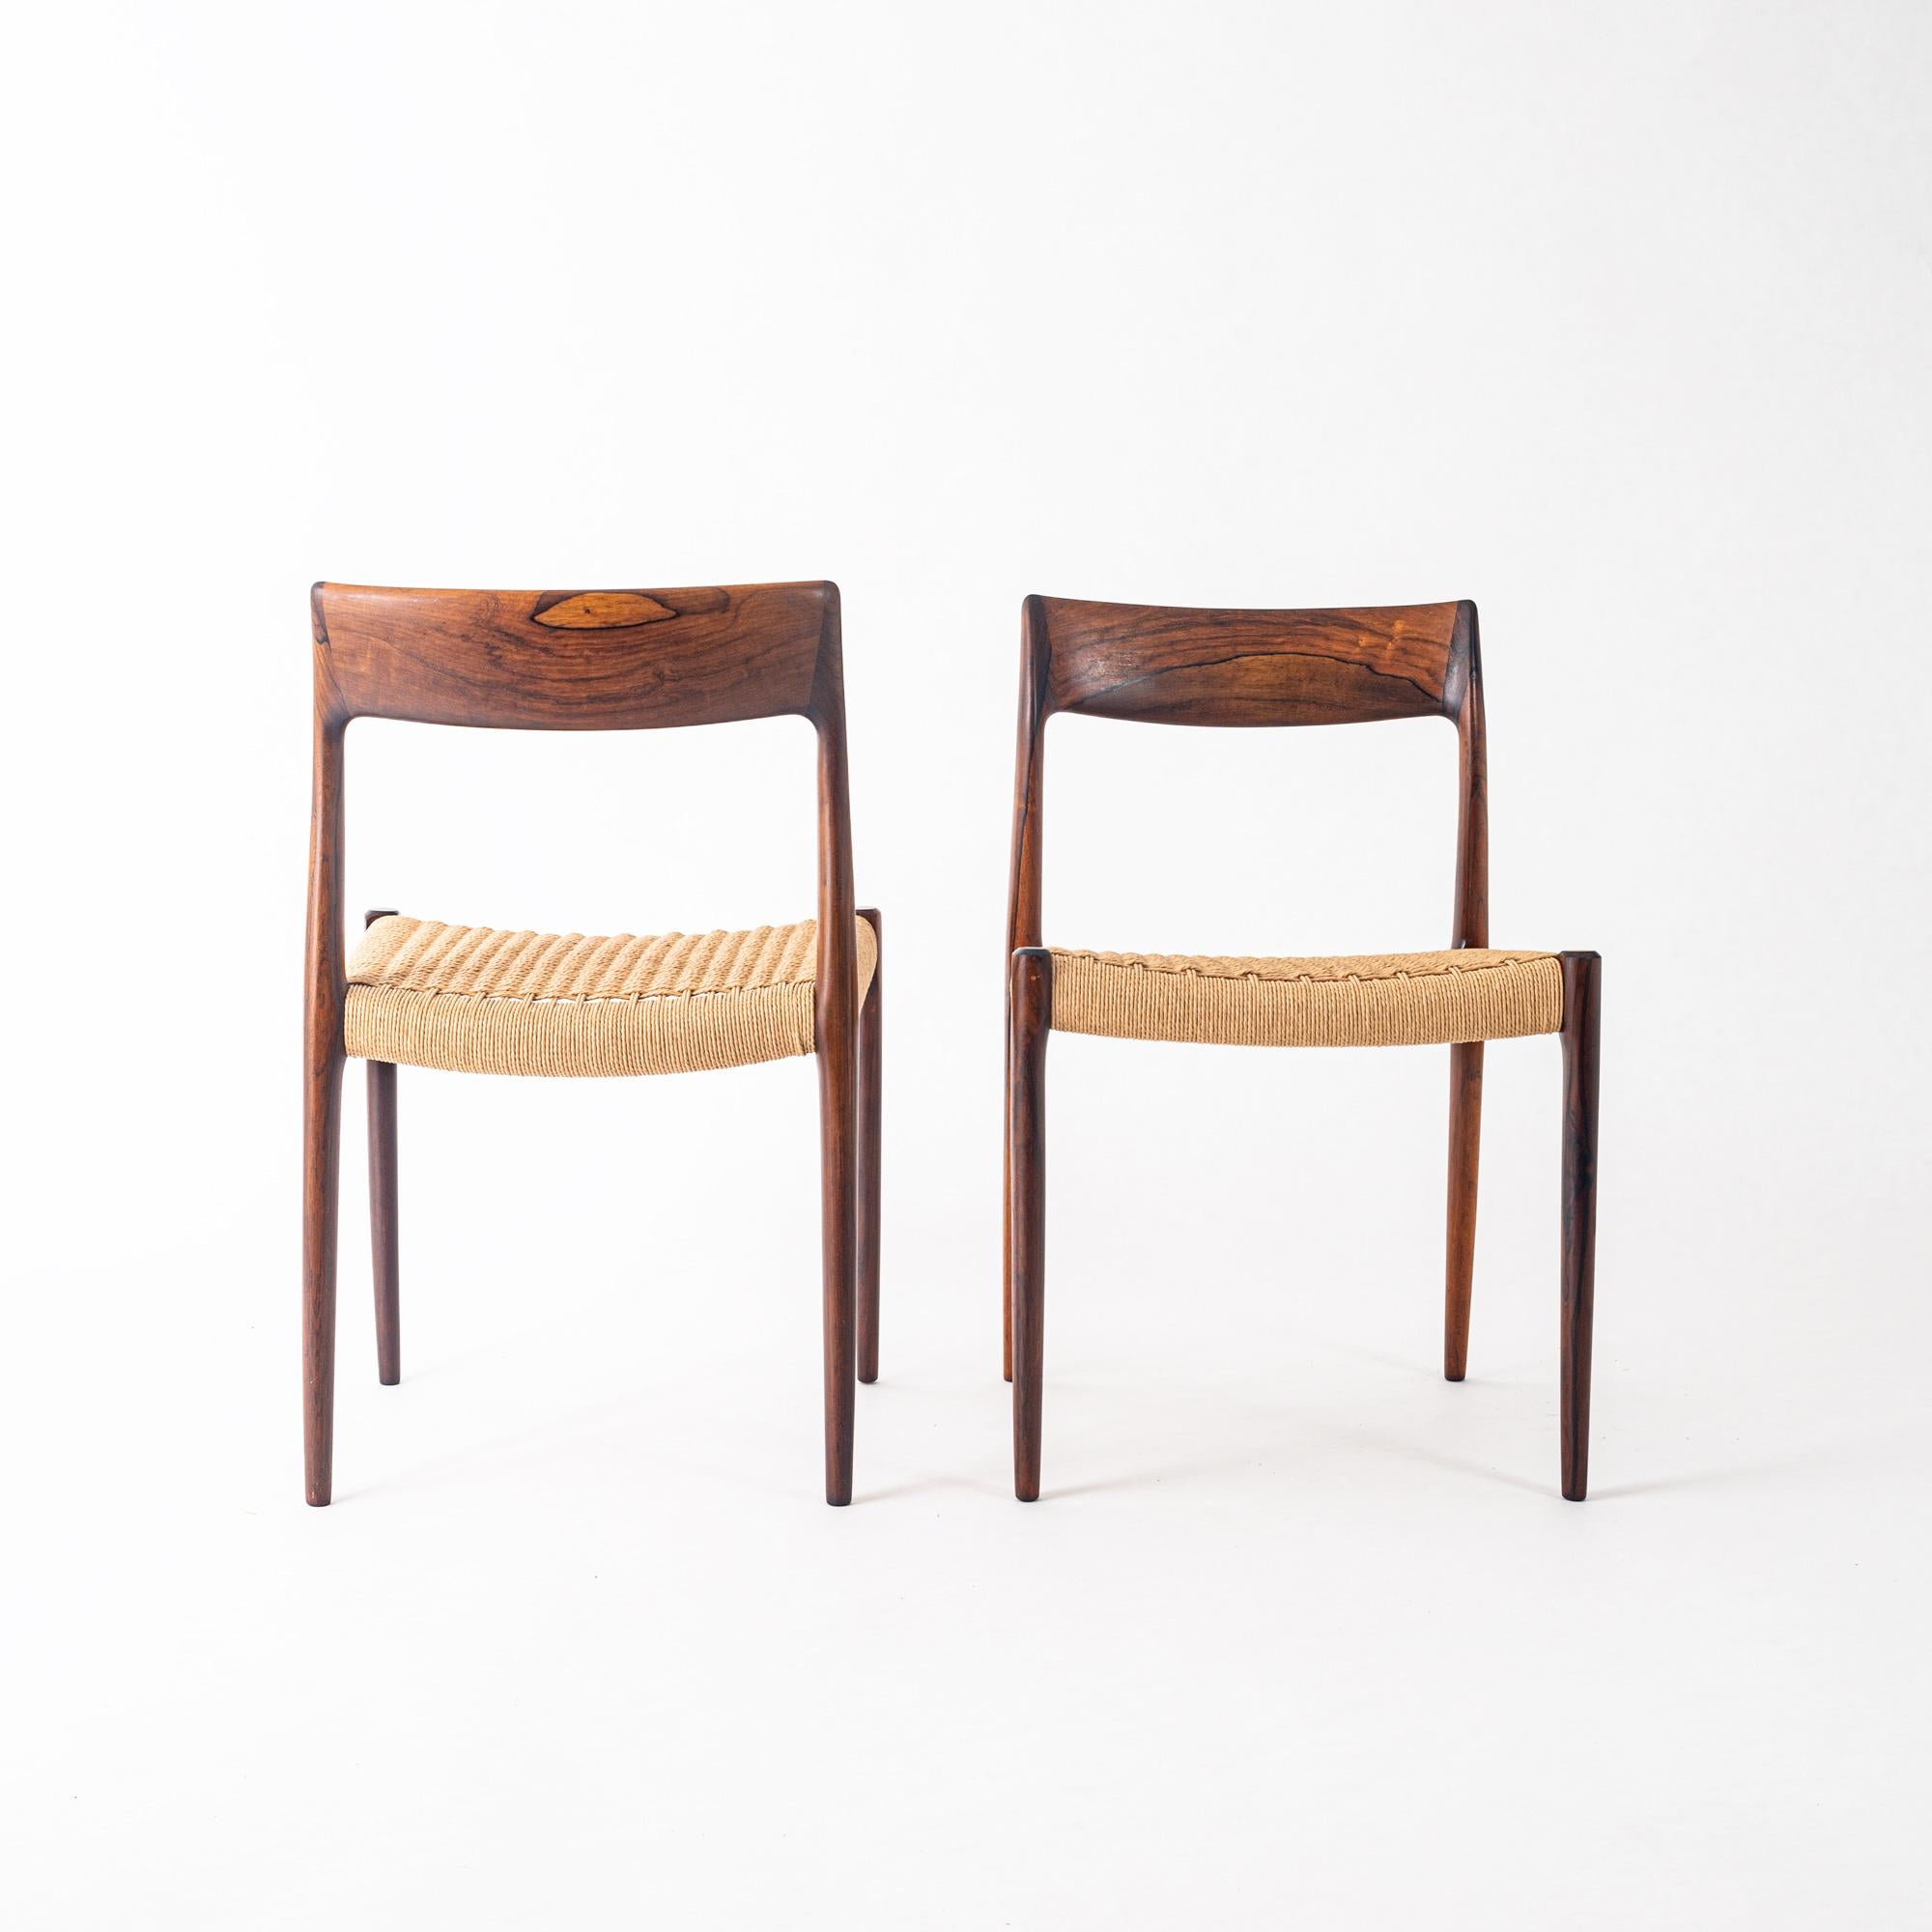 Set of 12 Brazilian rosewood dining chairs designed by Niels O. Moller for J.L. Moller Mobelfabrik, Denmark, 1959. Newly refinished and papercorded seats, the makers mark is on the bottom of each chair. Each chair has unique wood grains, a beautiful